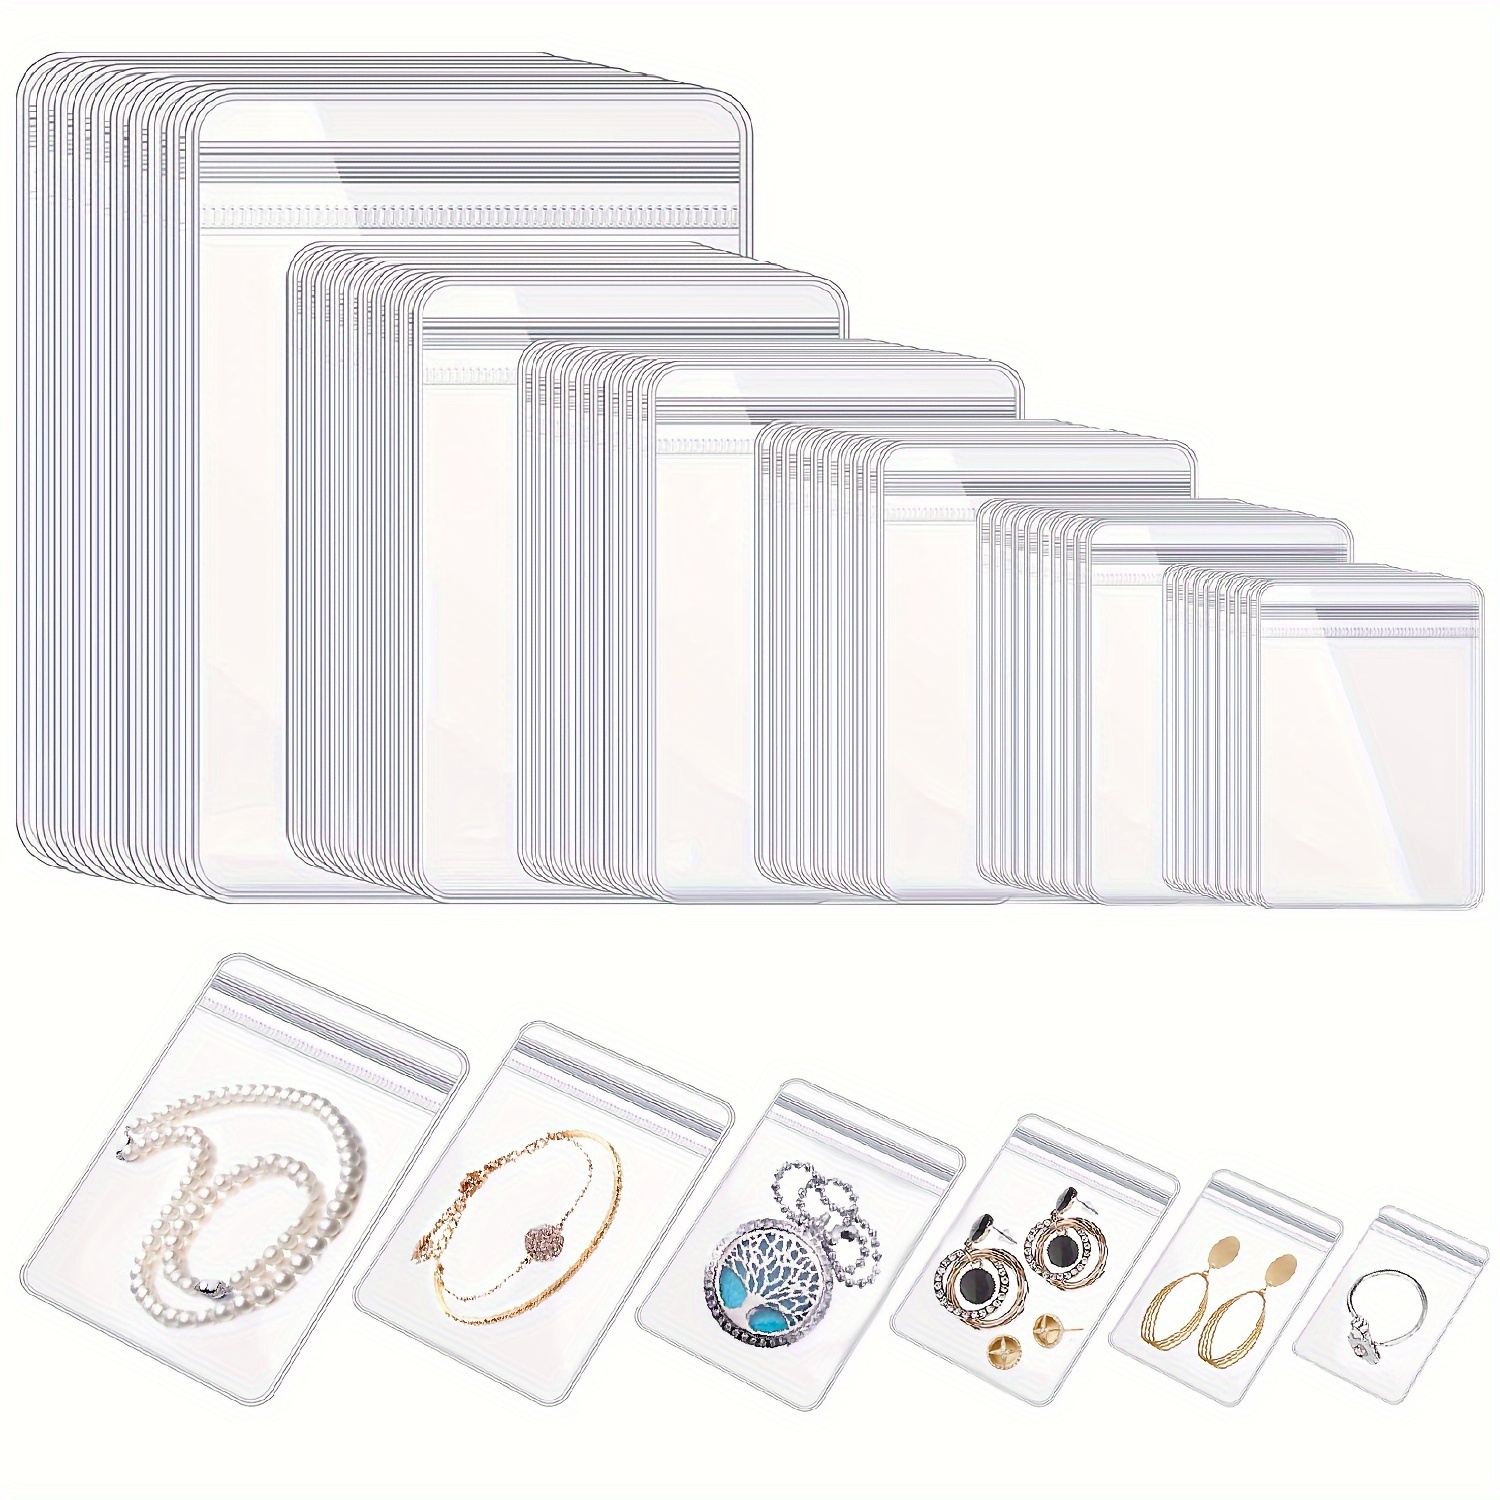  WEDDINGHELPER Jewelry Bags Small Self-Sealing Plastic Zip Clear  Bags PVC Transparent Lock Bag for Storing Bracelets Rings Earrings Ziplock  Pouch ((1.96 x 2.75inch(100pcs)) : Arts, Crafts & Sewing